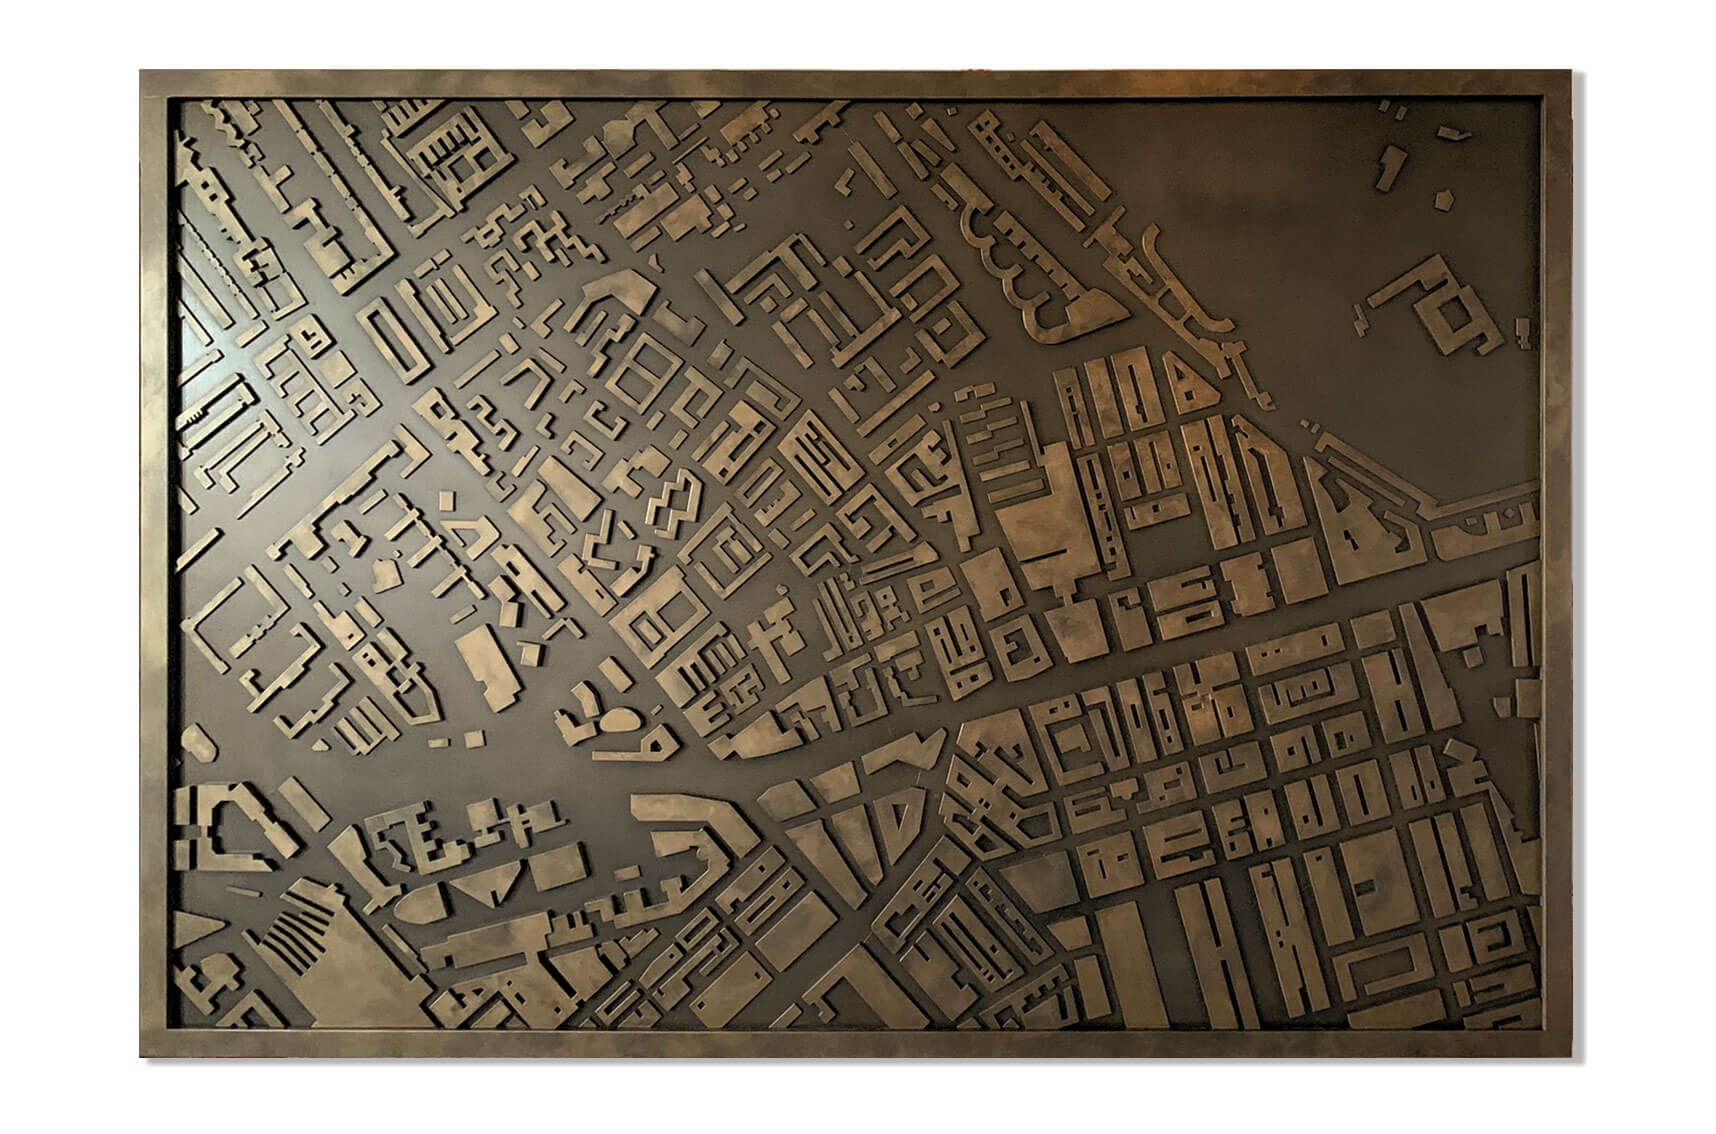 Berkeley Homes, West End Gate, installation, map relief, artwork, large scale installation, graphics, graphic design, laser cut, laser cut installation, relief, two toned, bronze, metallic installation, bespoke artwork, bespoke installation, commissioned artwork, map artwork, map installation,